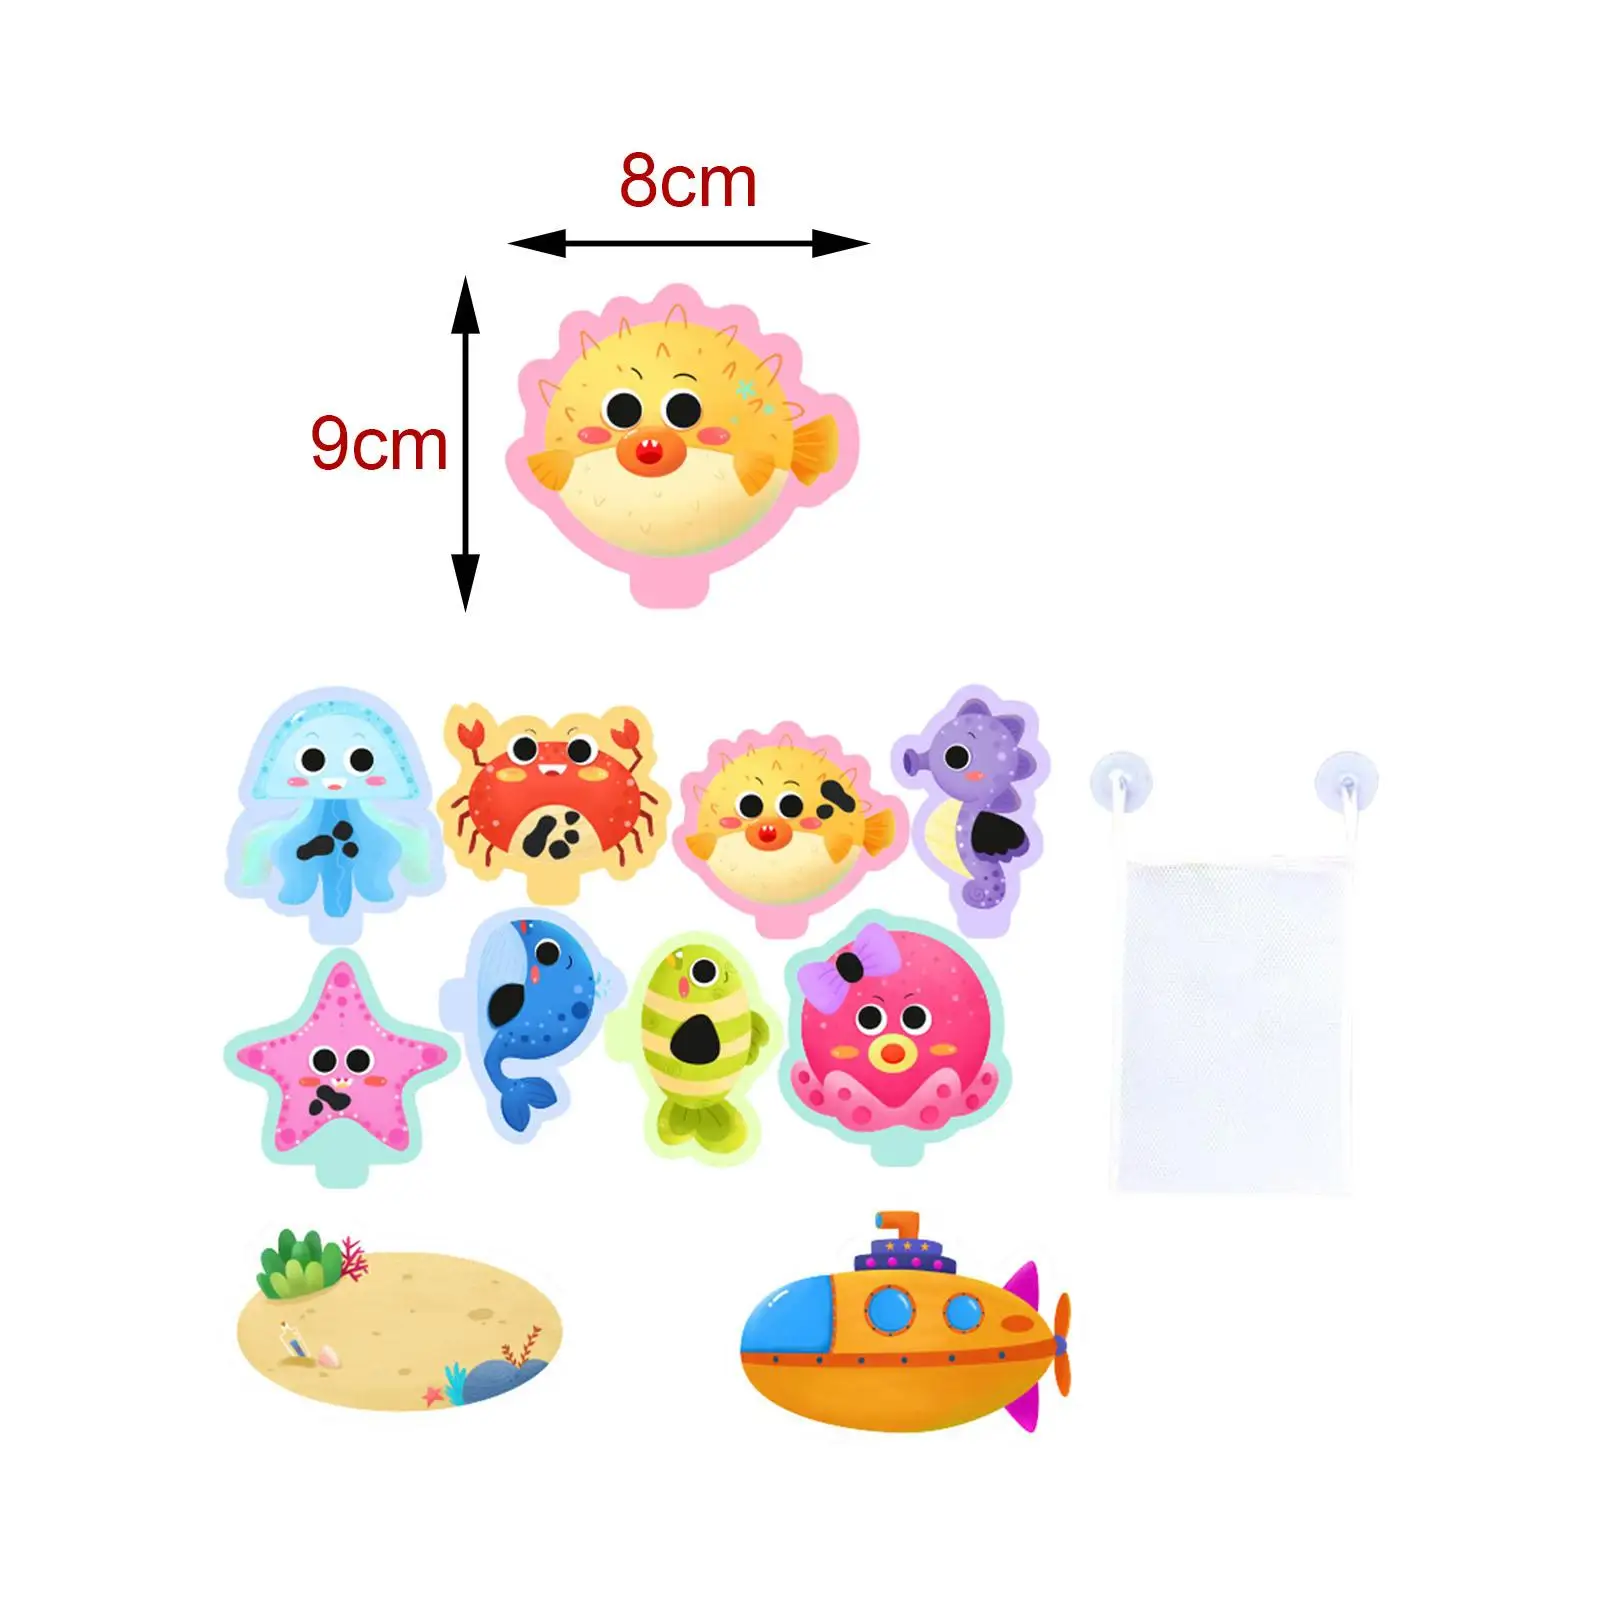 10 Pieces Early Education DIY Sticker Puzzles Toys with Storage Bag Bathtub Floating Bathing Toy for Children Toddler Girls Boys